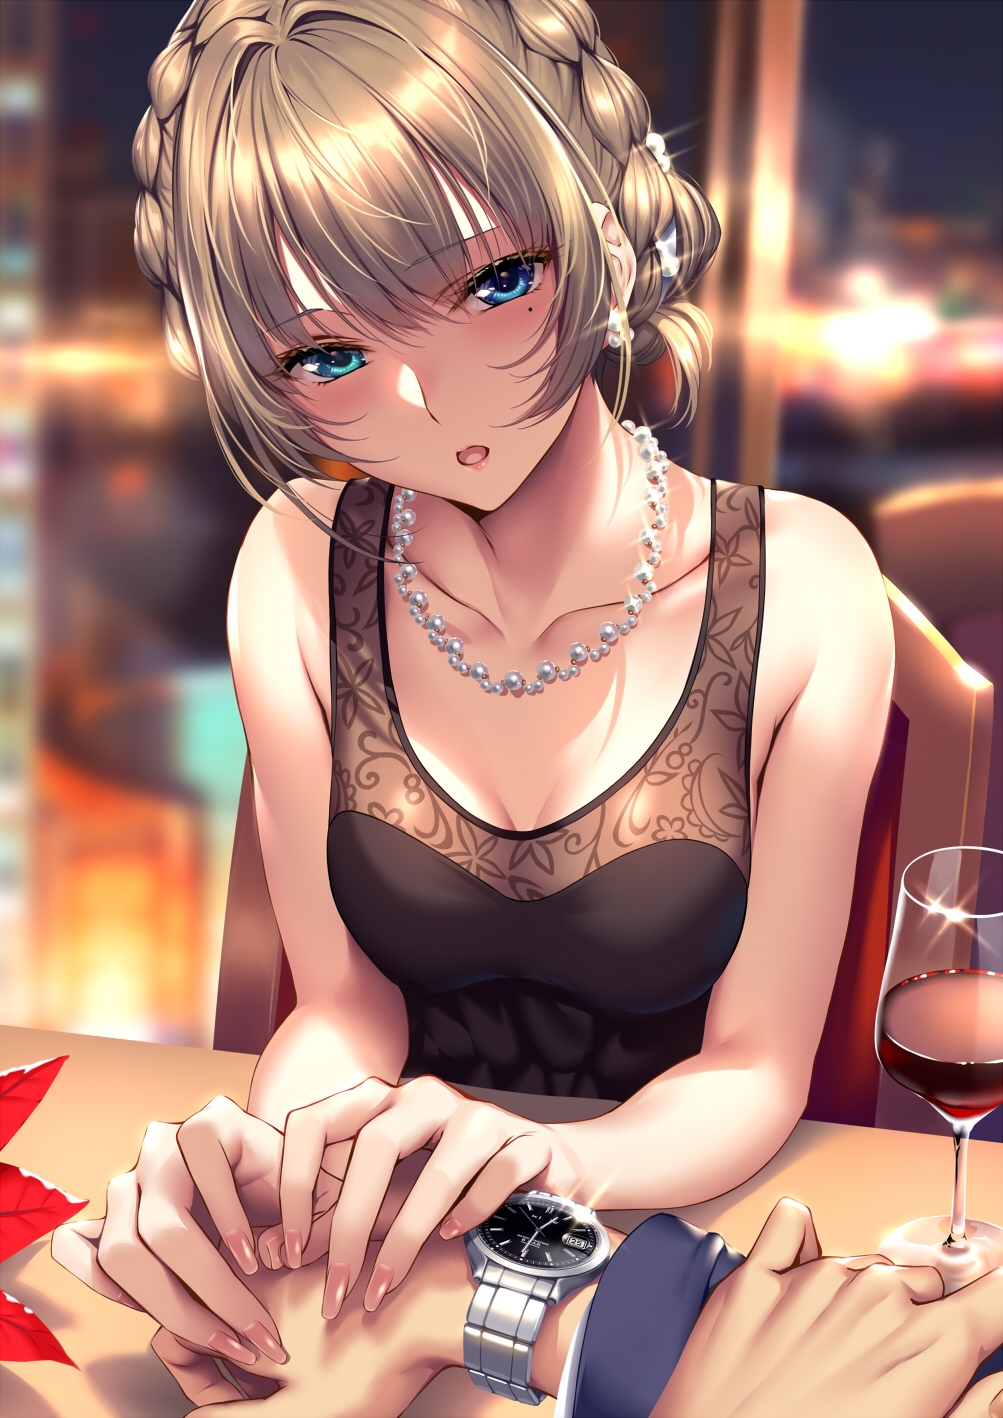 Anime Anime Girls Blue Eyes Blonde Blond Hair Open Mouth Jewelry Necklace Black Dress Braided Hair F 1003x1418